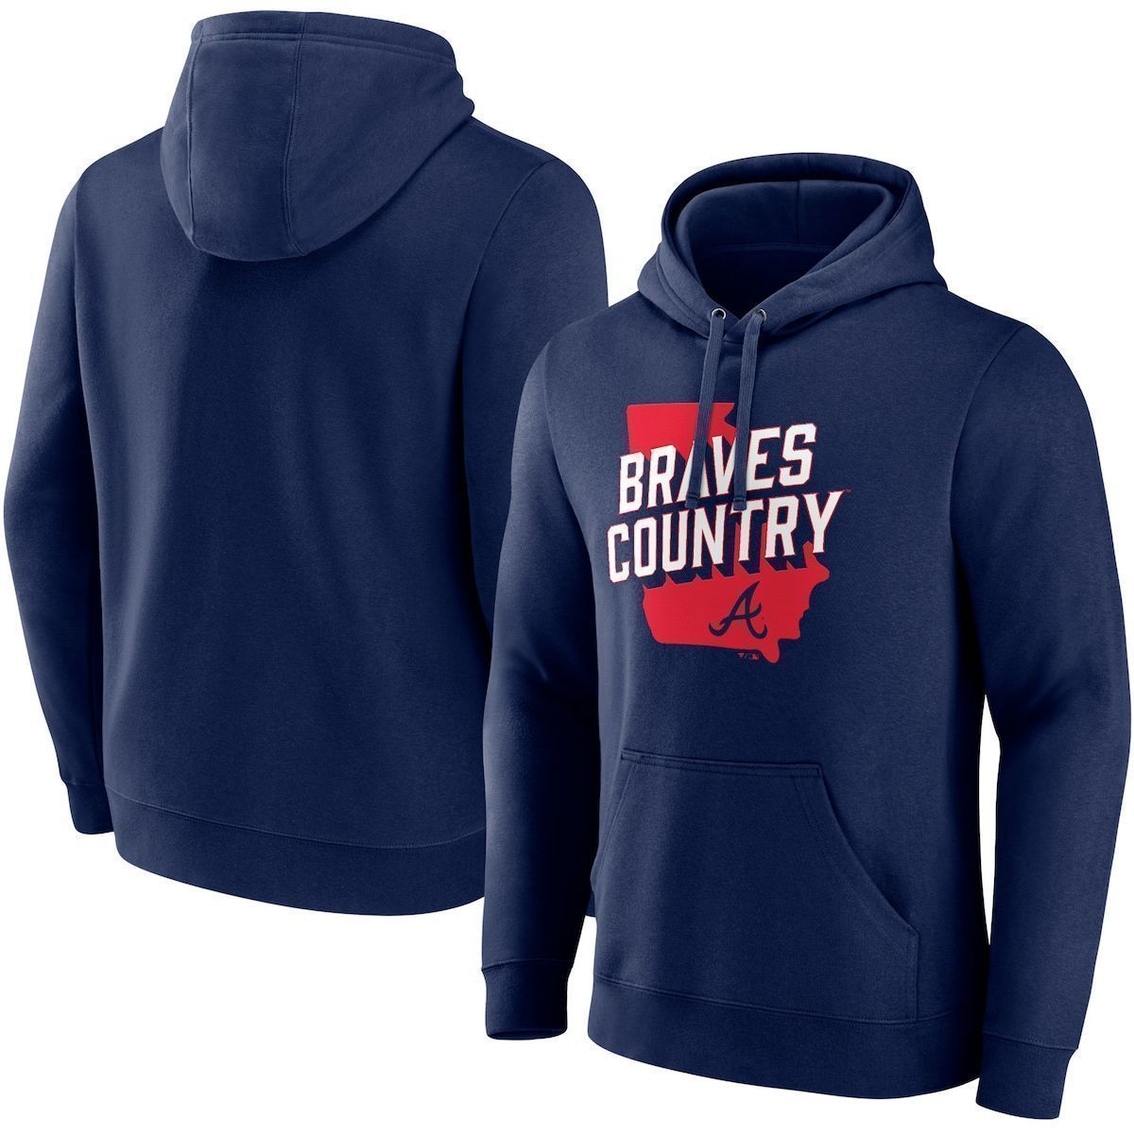 Fanatics Branded Men's Navy Atlanta Braves Hometown Collection Team Fitted Pullover Hoodie - Image 2 of 4